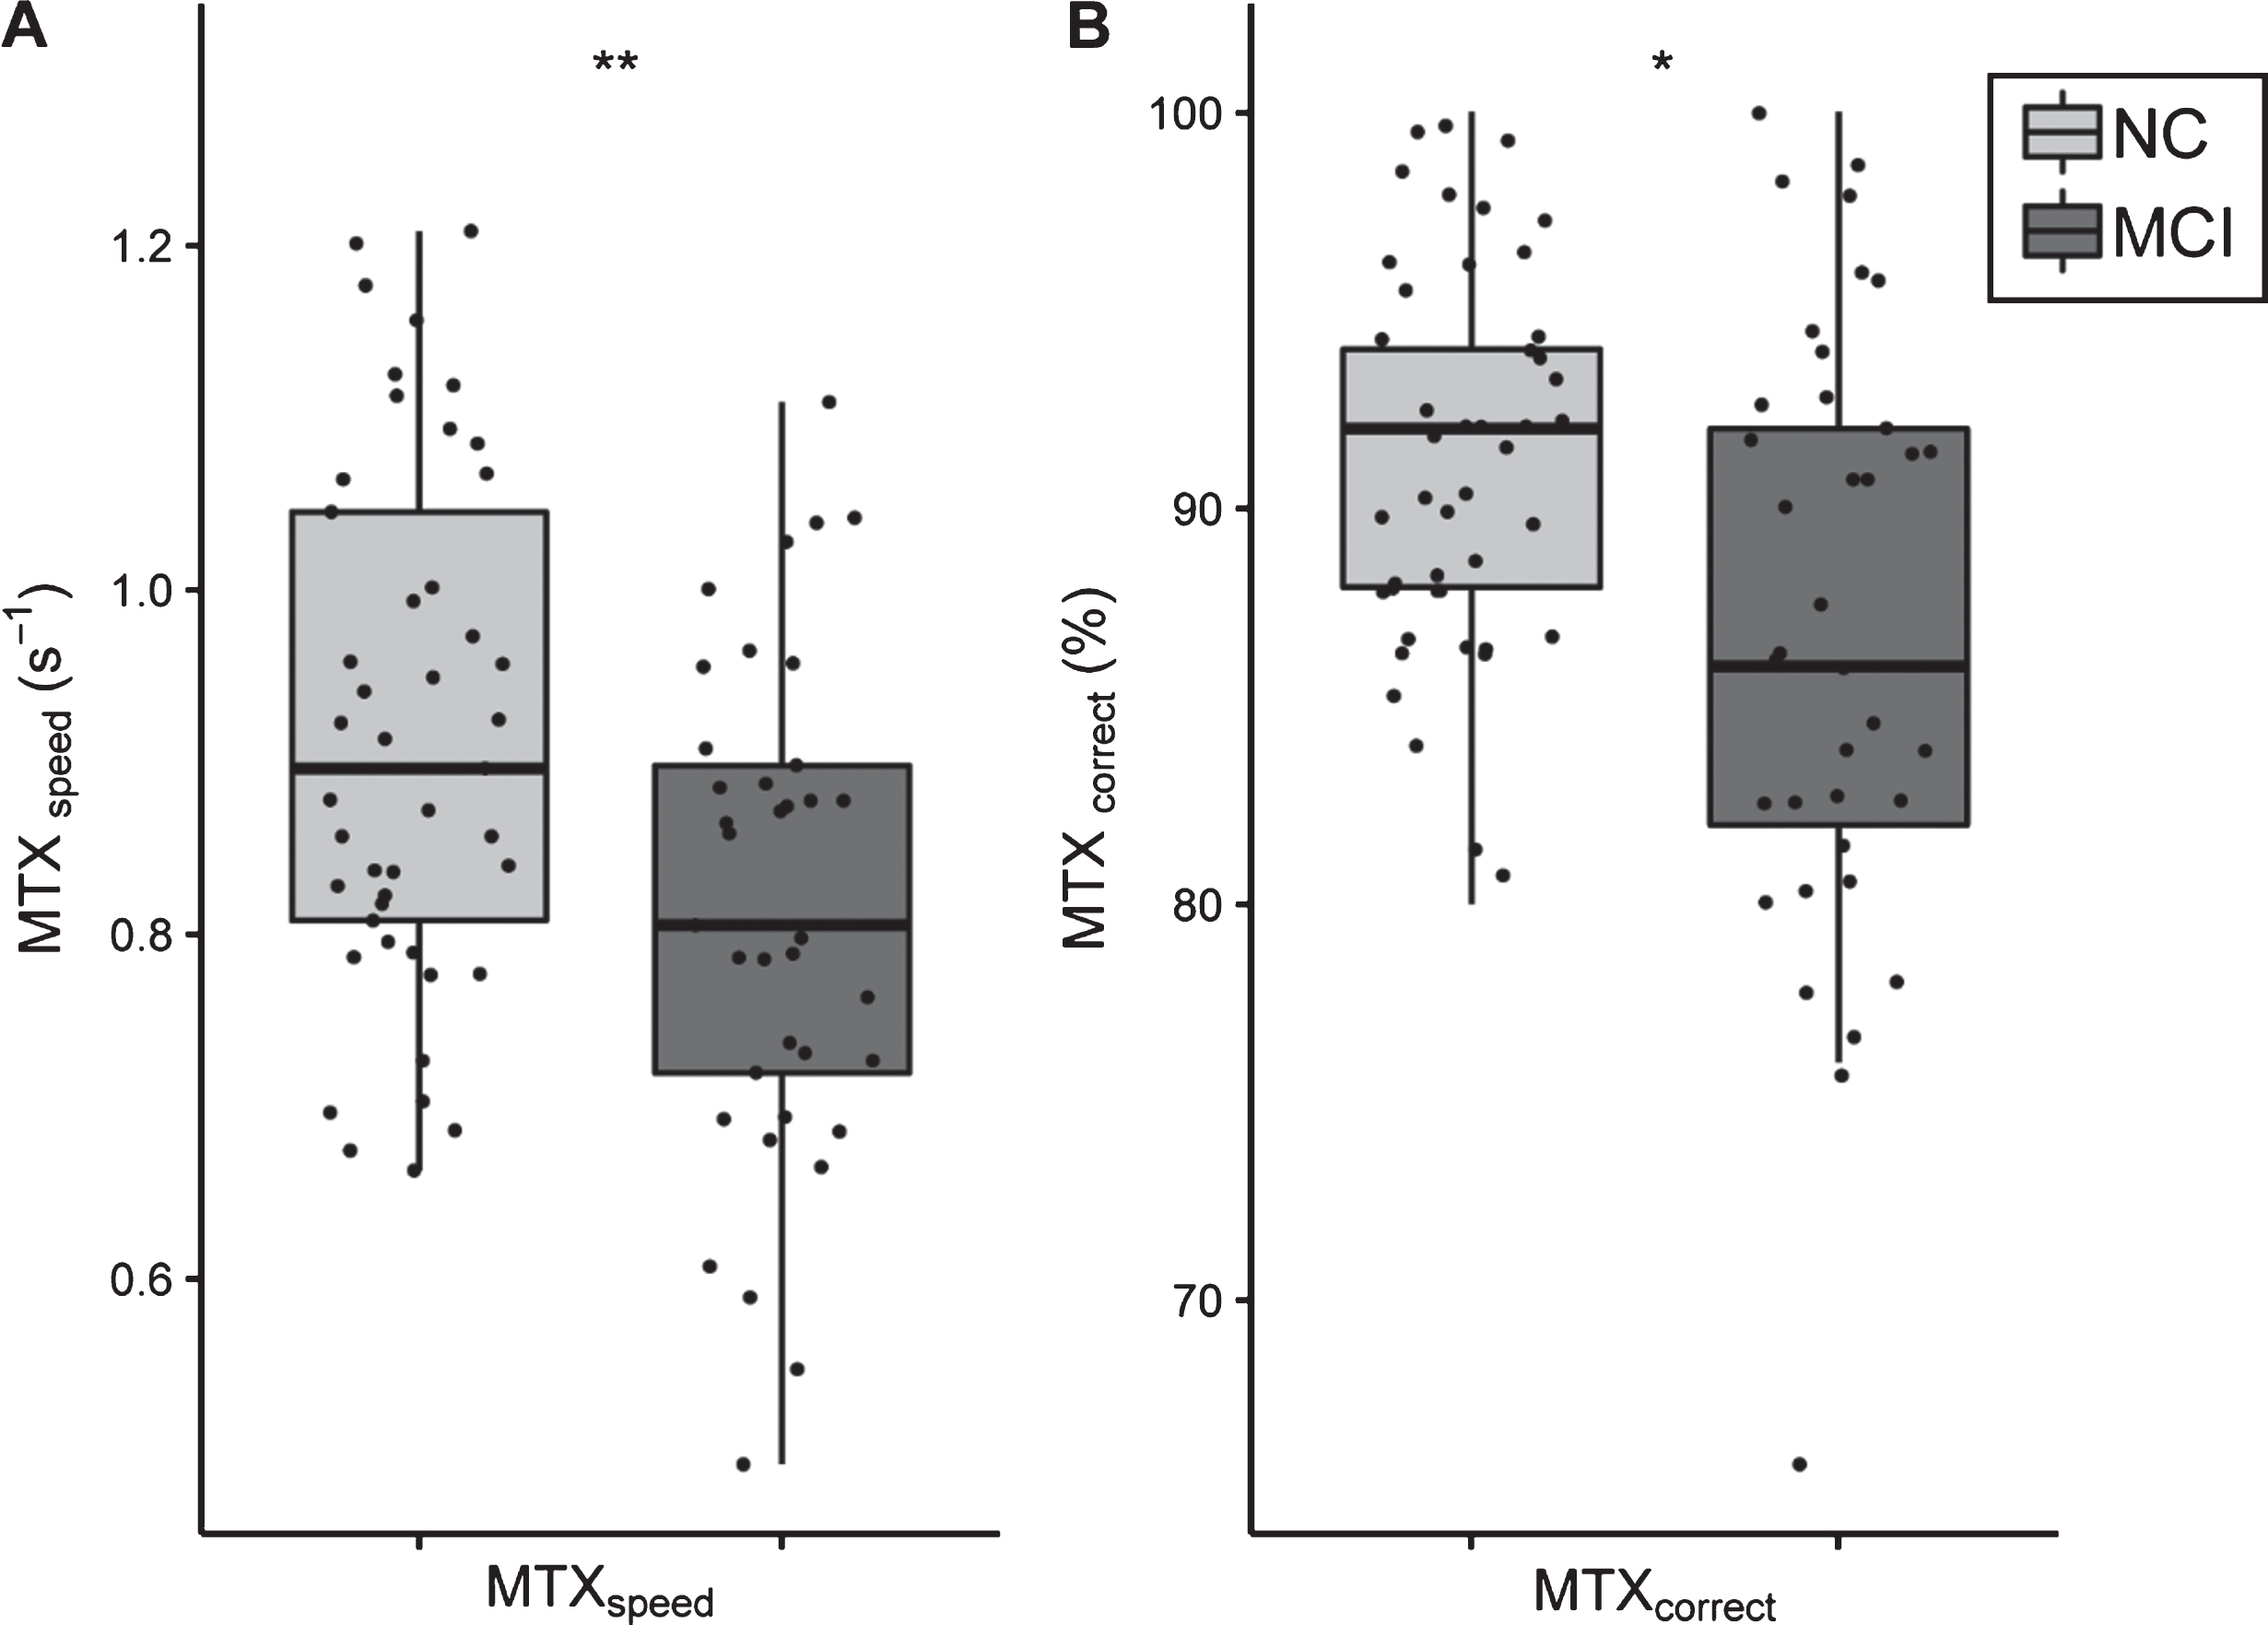 Boxplots of MTX test results for NC and MCI groups. A) MTXspeed test result and B) MTXcorrect test result. Both outcome variables of the MTX tests are significantly lower in the MCI group compared to NC. The light grey color indicates NC subjects, whereas the dark grey color indicates MCI subjects.